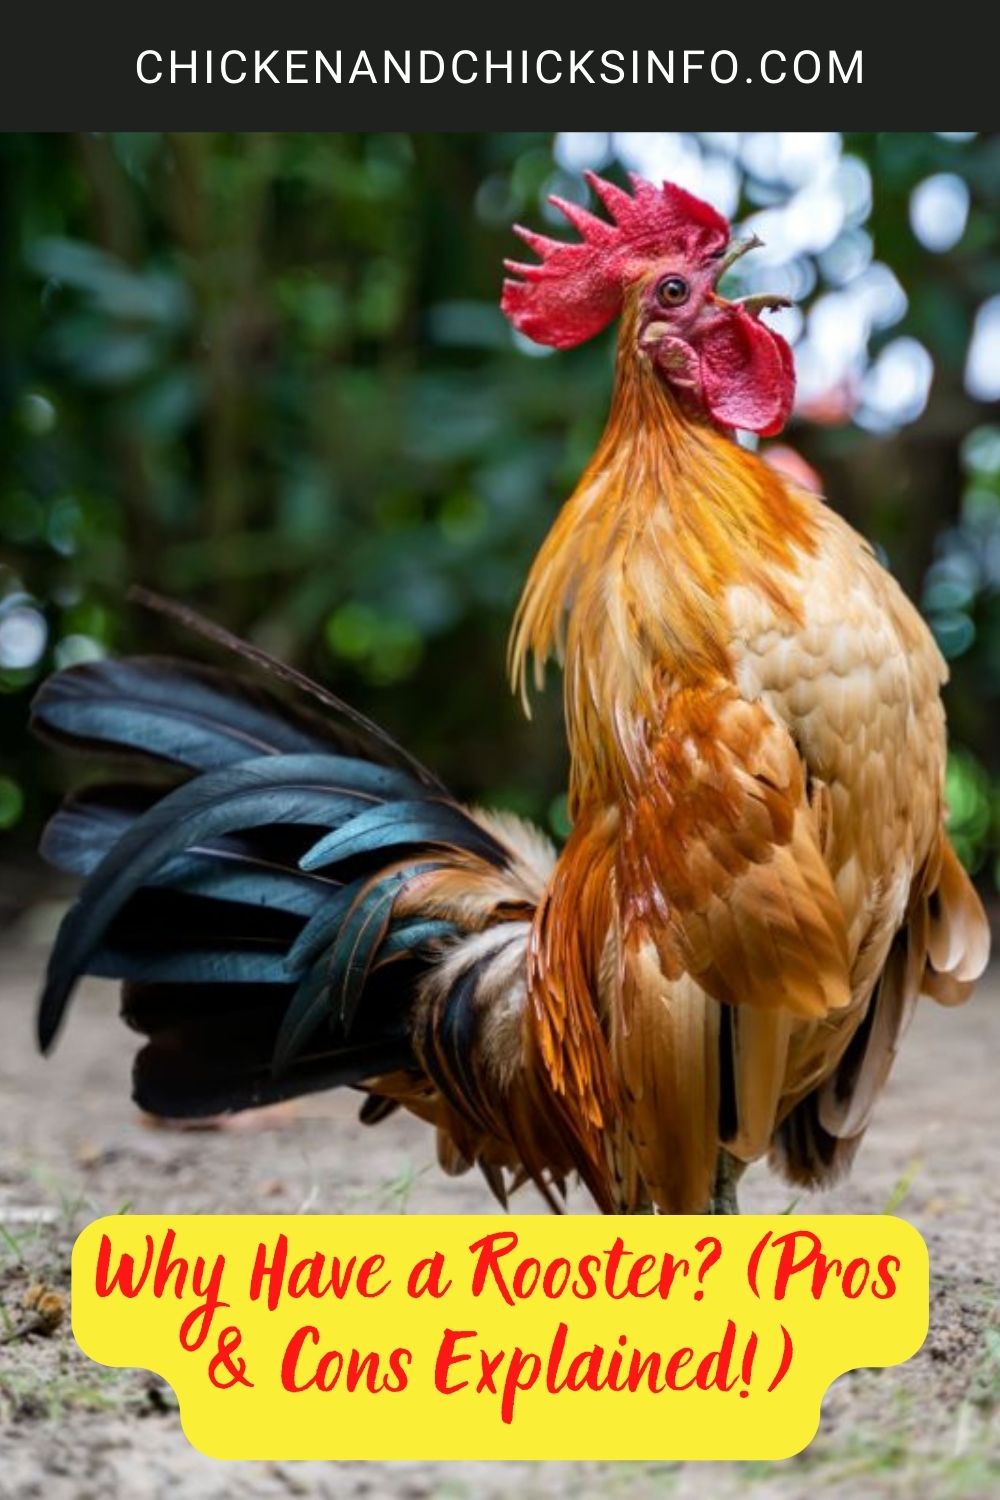 Why Have a Rooster? (Pros & Cons Explained!)